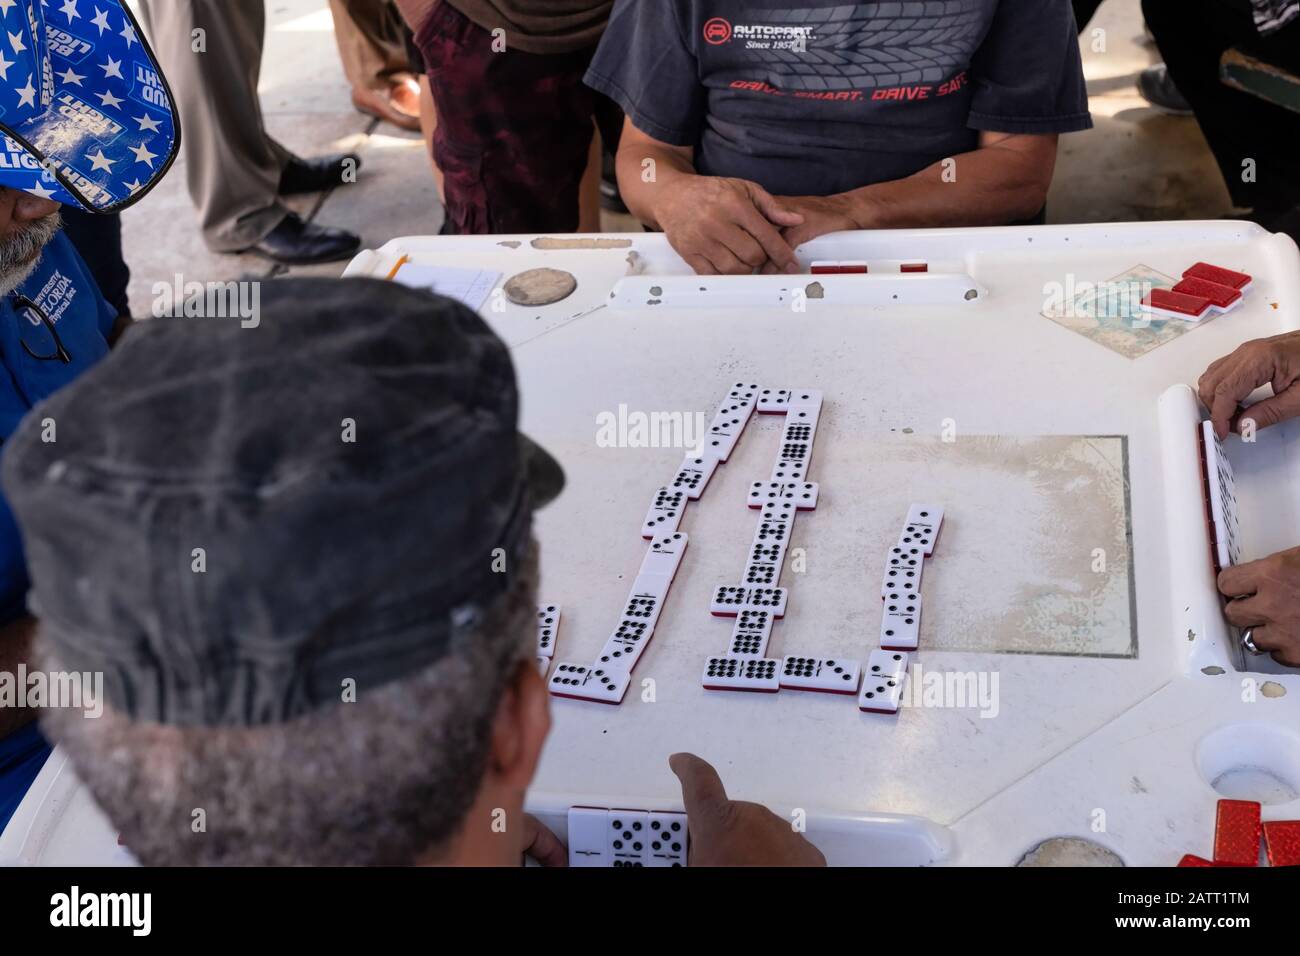 Domino Games Being Played Stock Photo